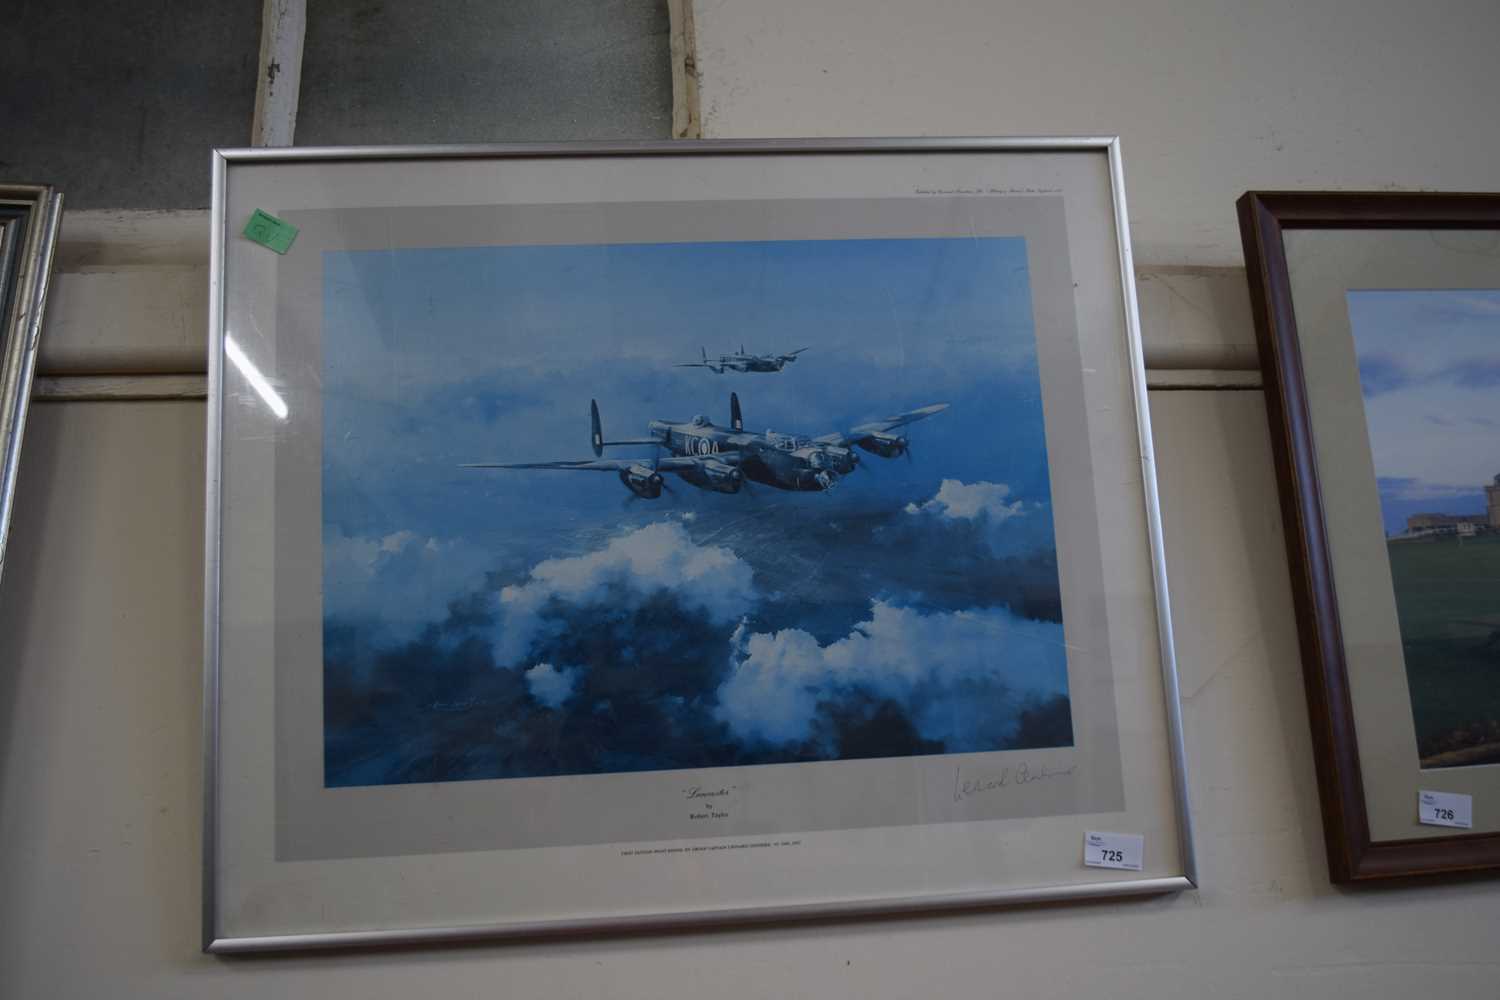 Lancaster by Robert Taylor, reproduction print, framed and glazed